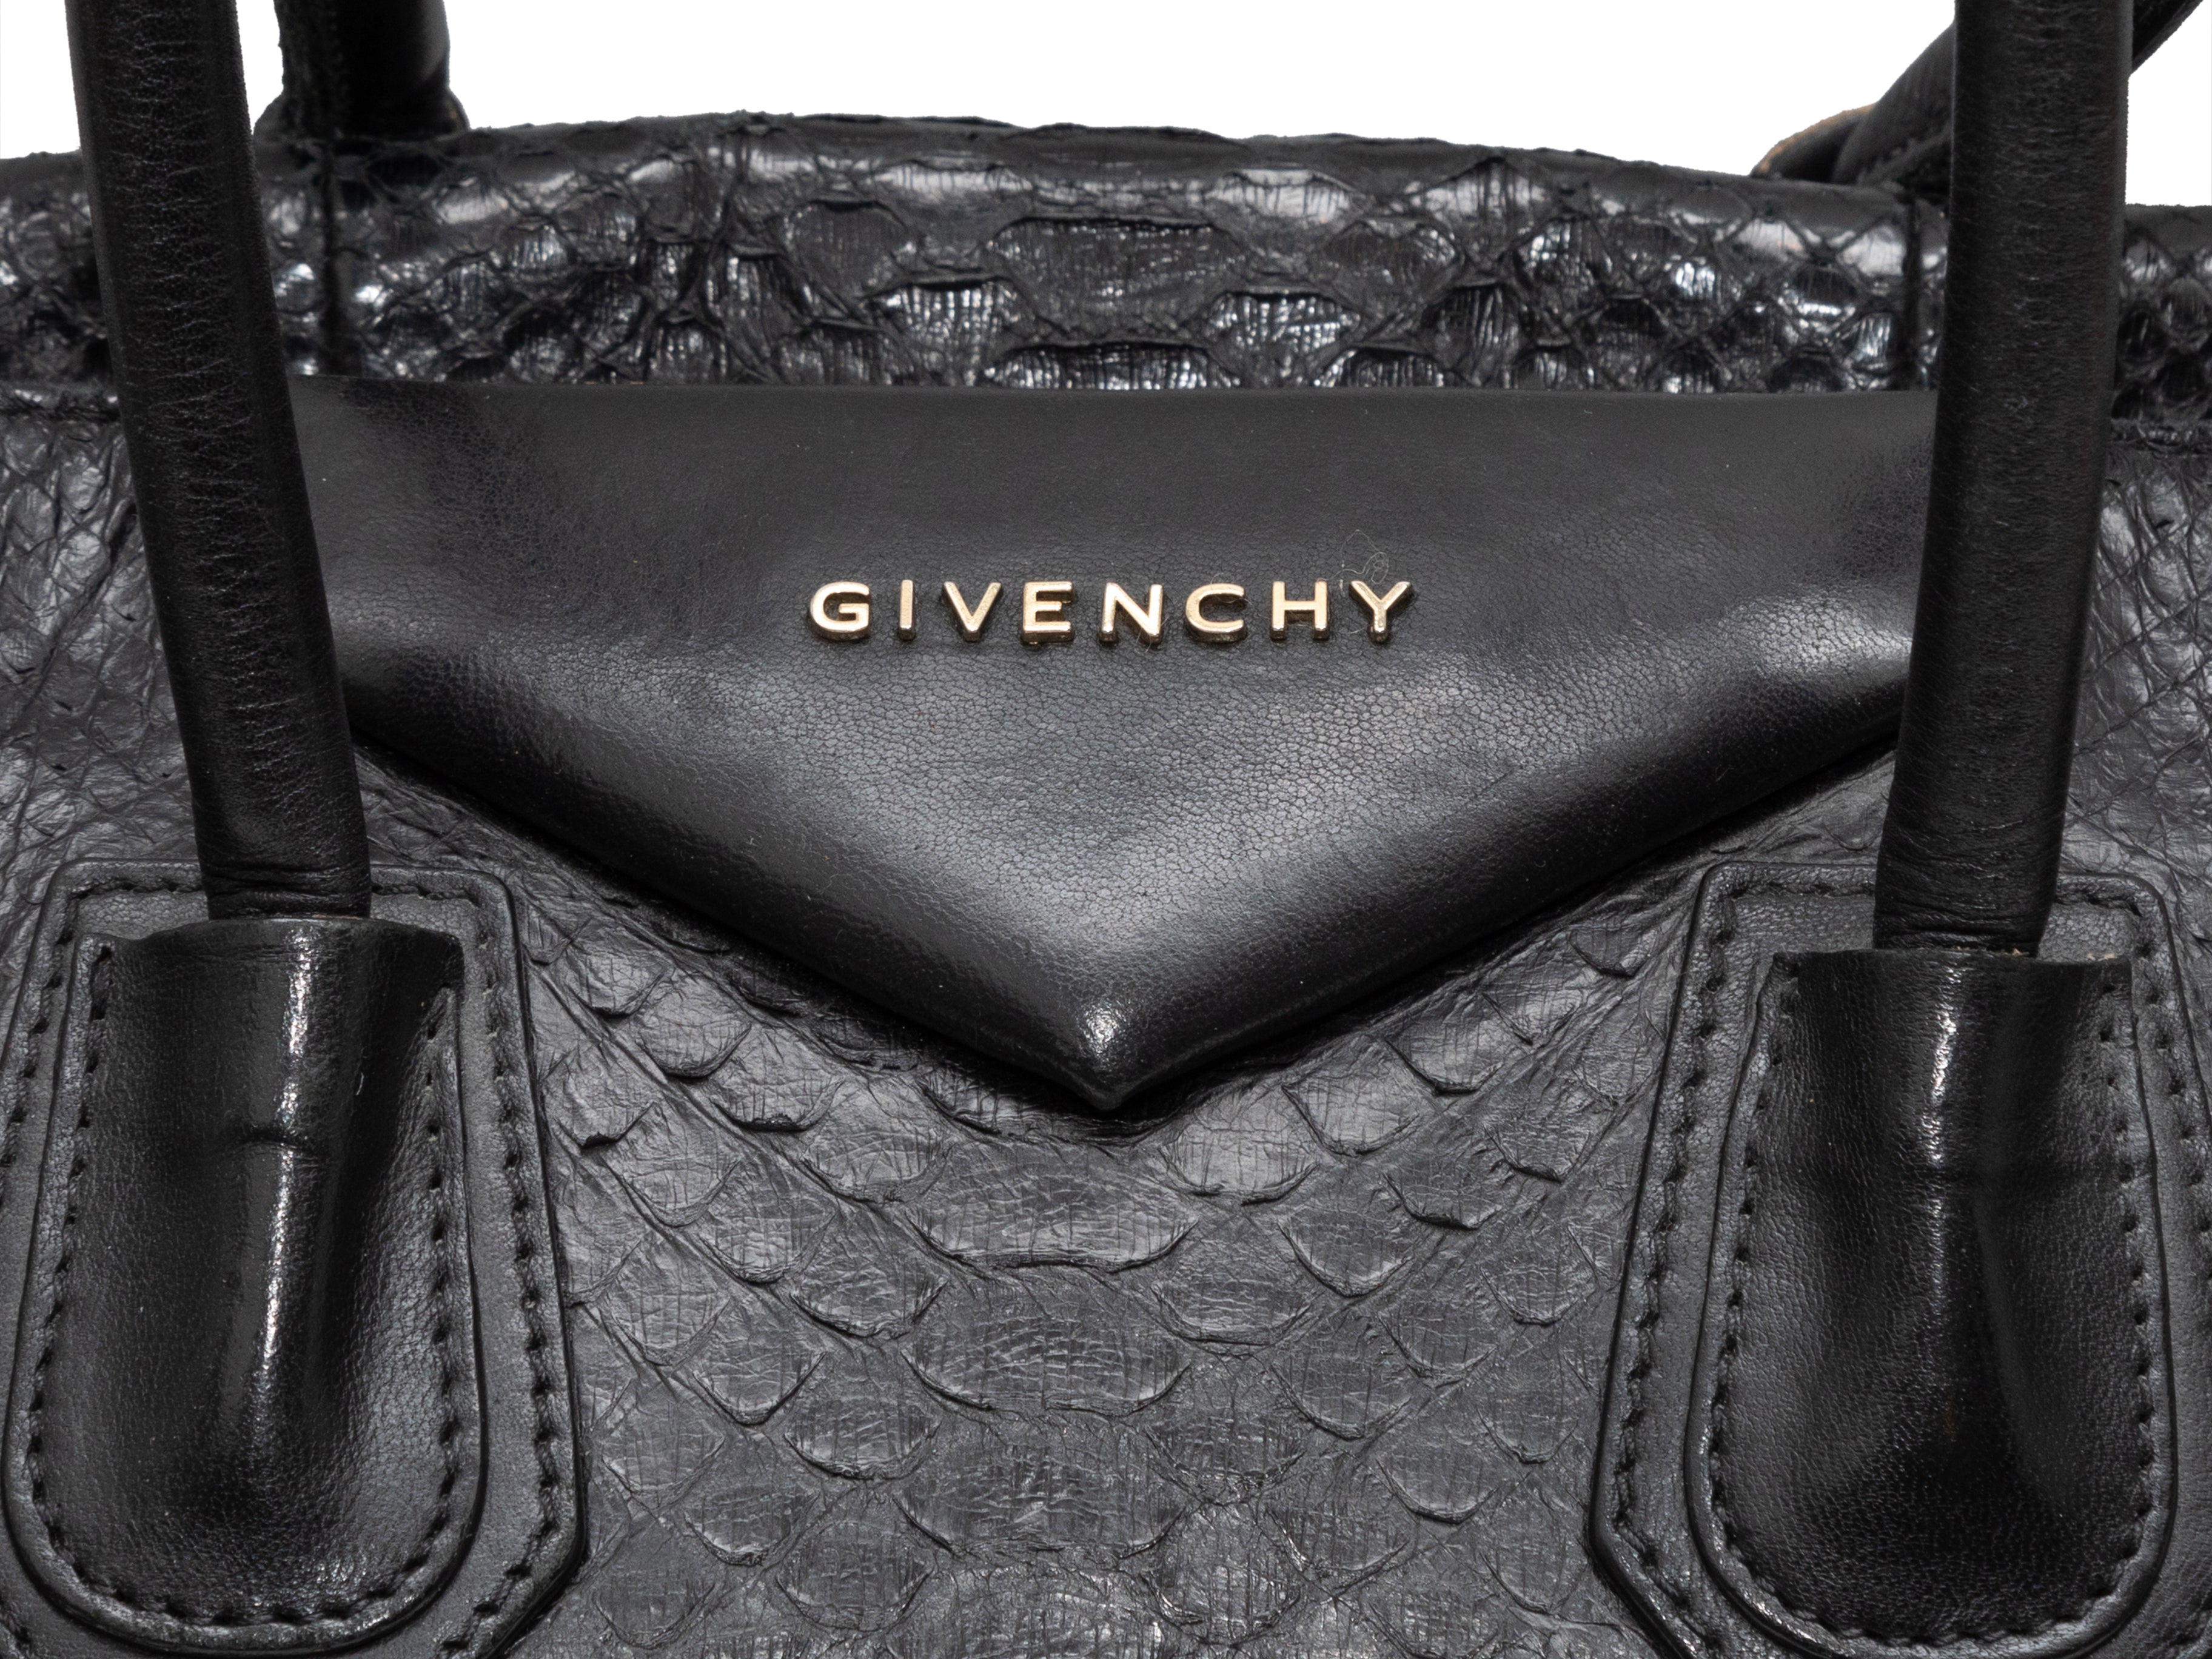 Leather handbag Givenchy Black in Leather - 30859607